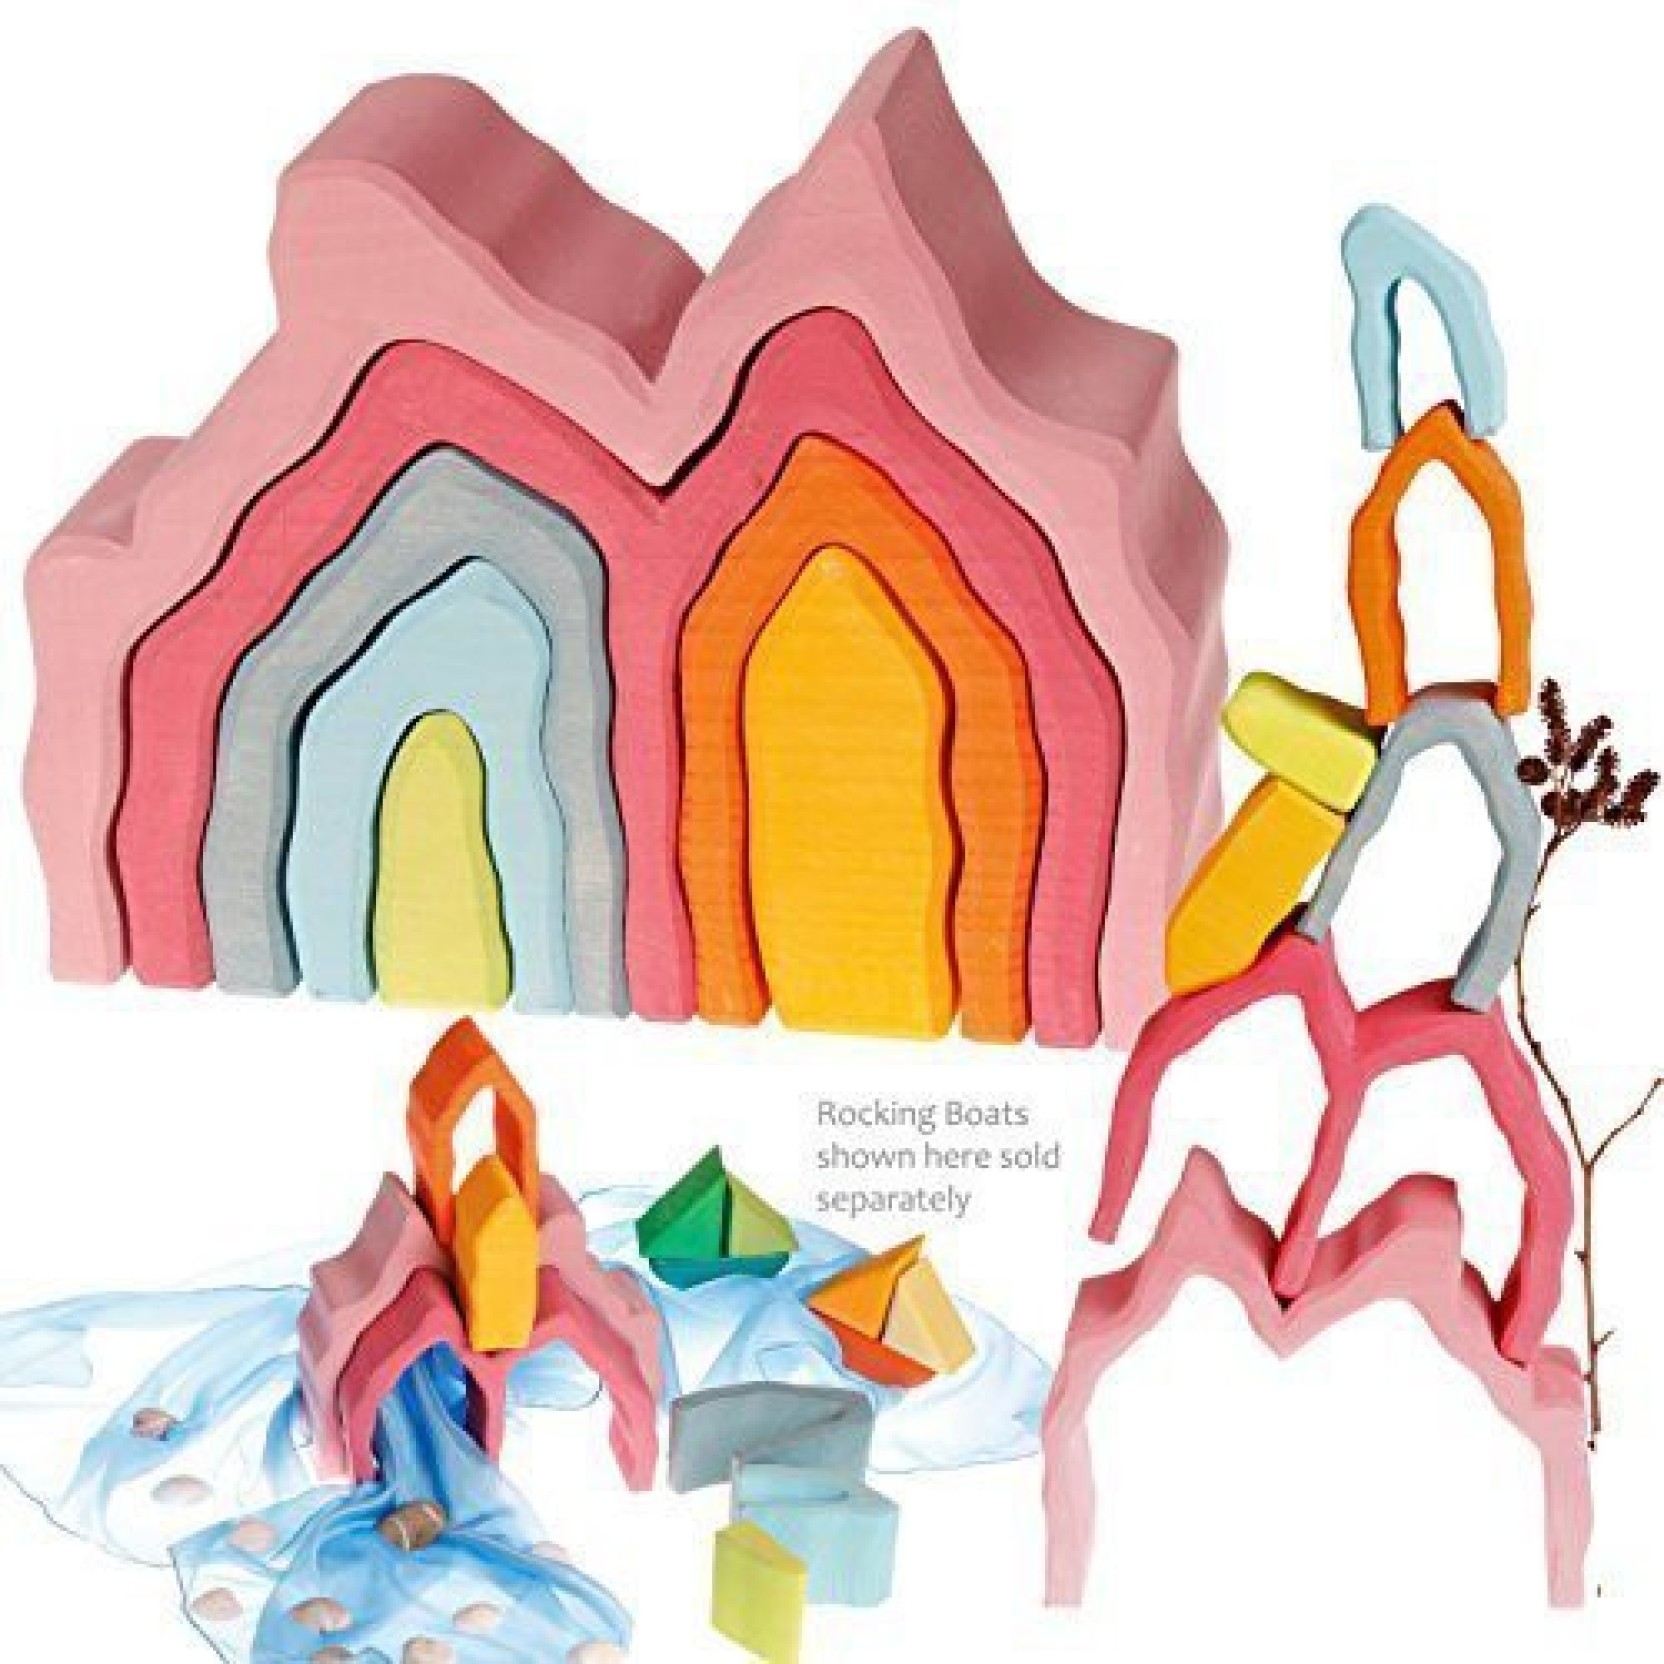 Grimm/’s Playful Blue Grotto Wooden Cave Arch Nature Blocks Nesting Stacking Puzzle Toy